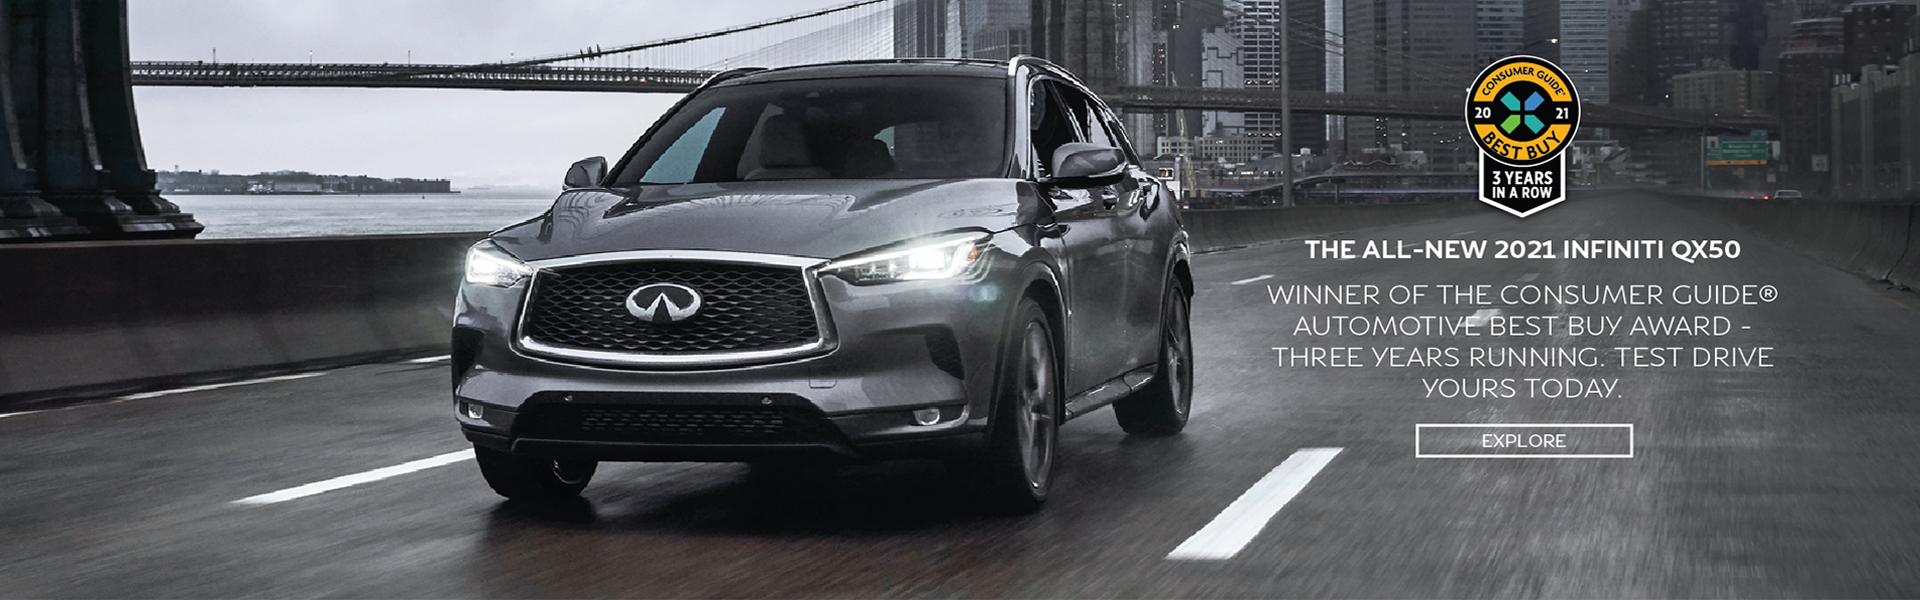 THE ALL-NEW 2021 INFINITI QX50 WINNER OF THE CONSUMER GUIDE 